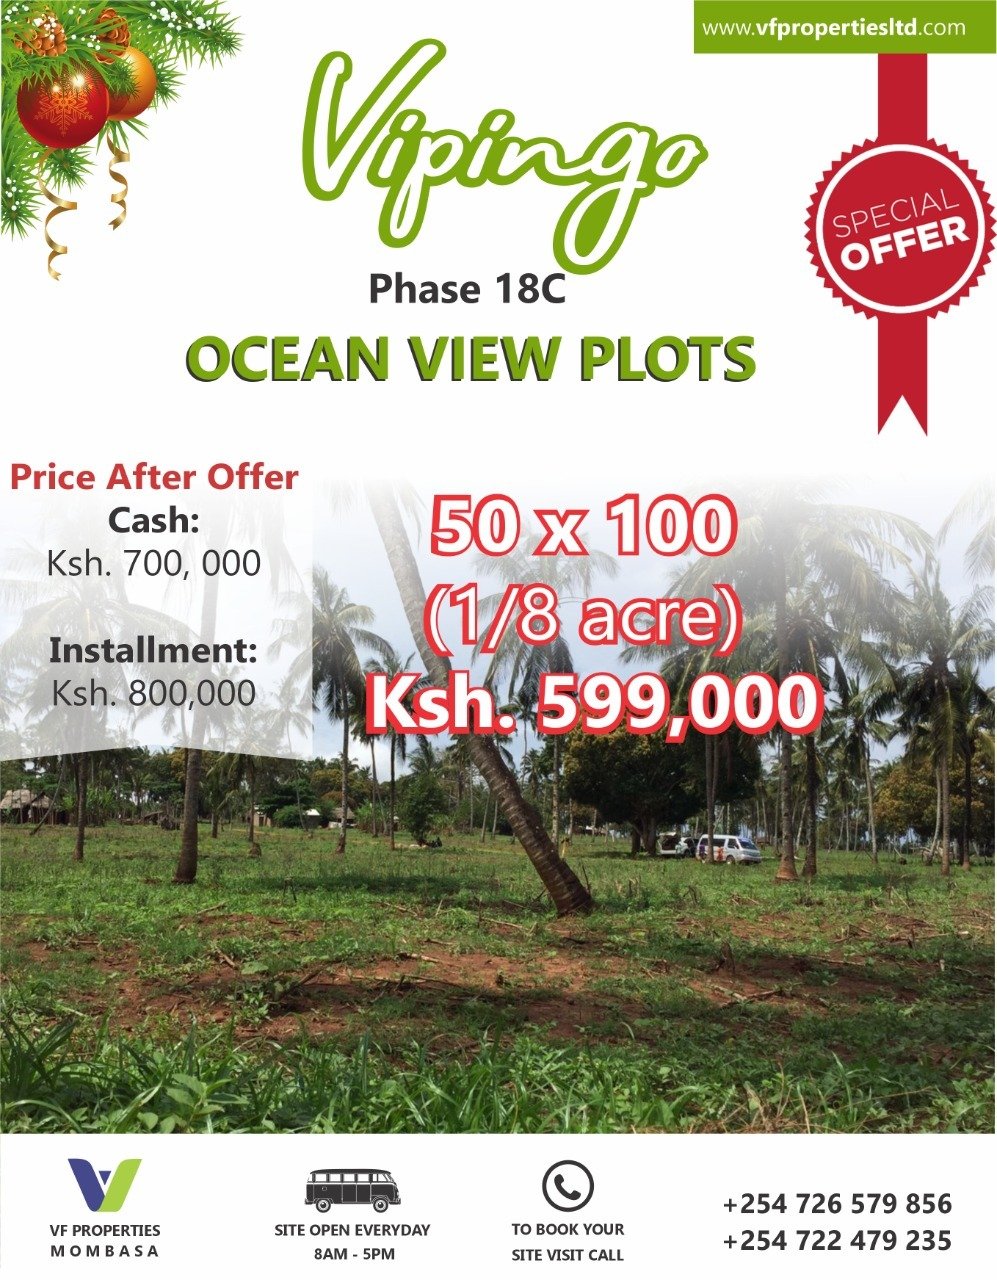 Phase 18C plots with Ocean View